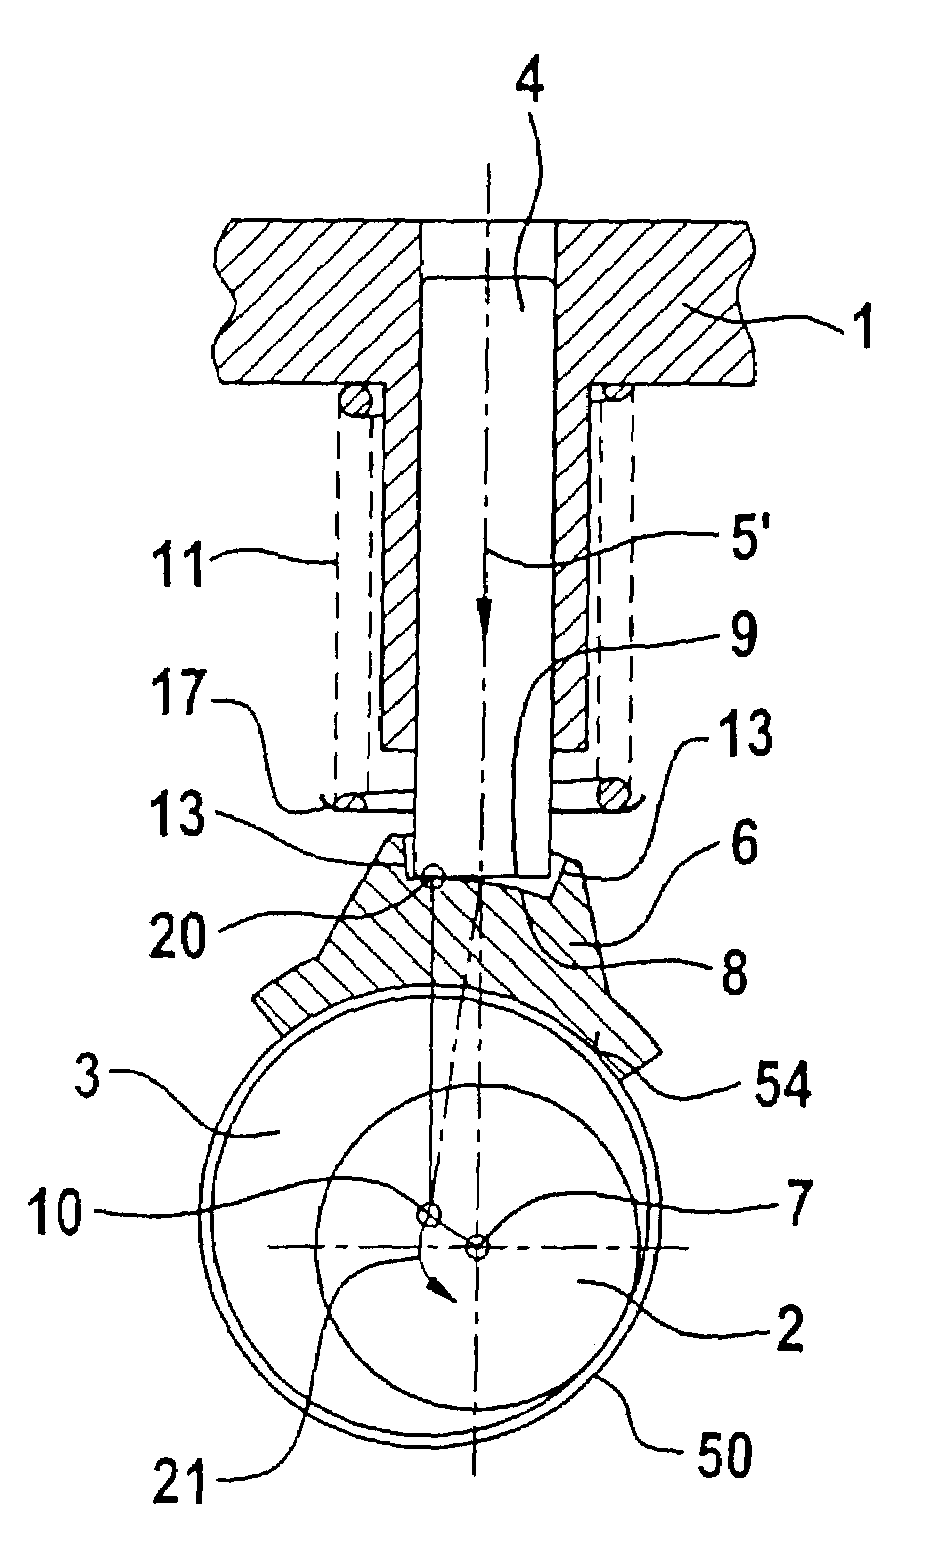 Radial piston pump with piston rod elements in rolling contact with the pump pistons